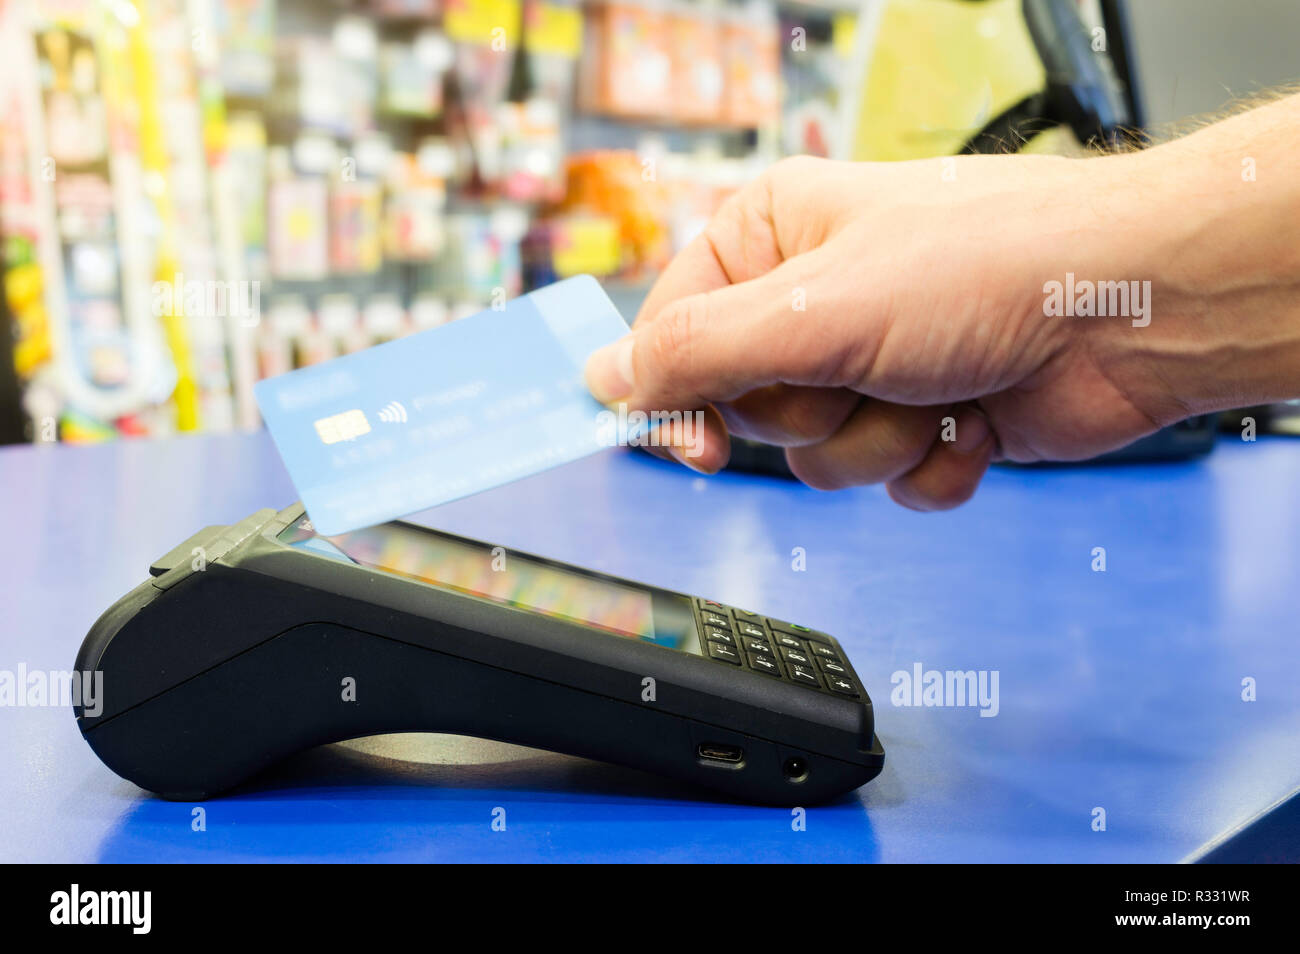 Mobile payments concept. Customer is paying using wireless or contactless credit card and payment terminal with NFC technology Stock Photo